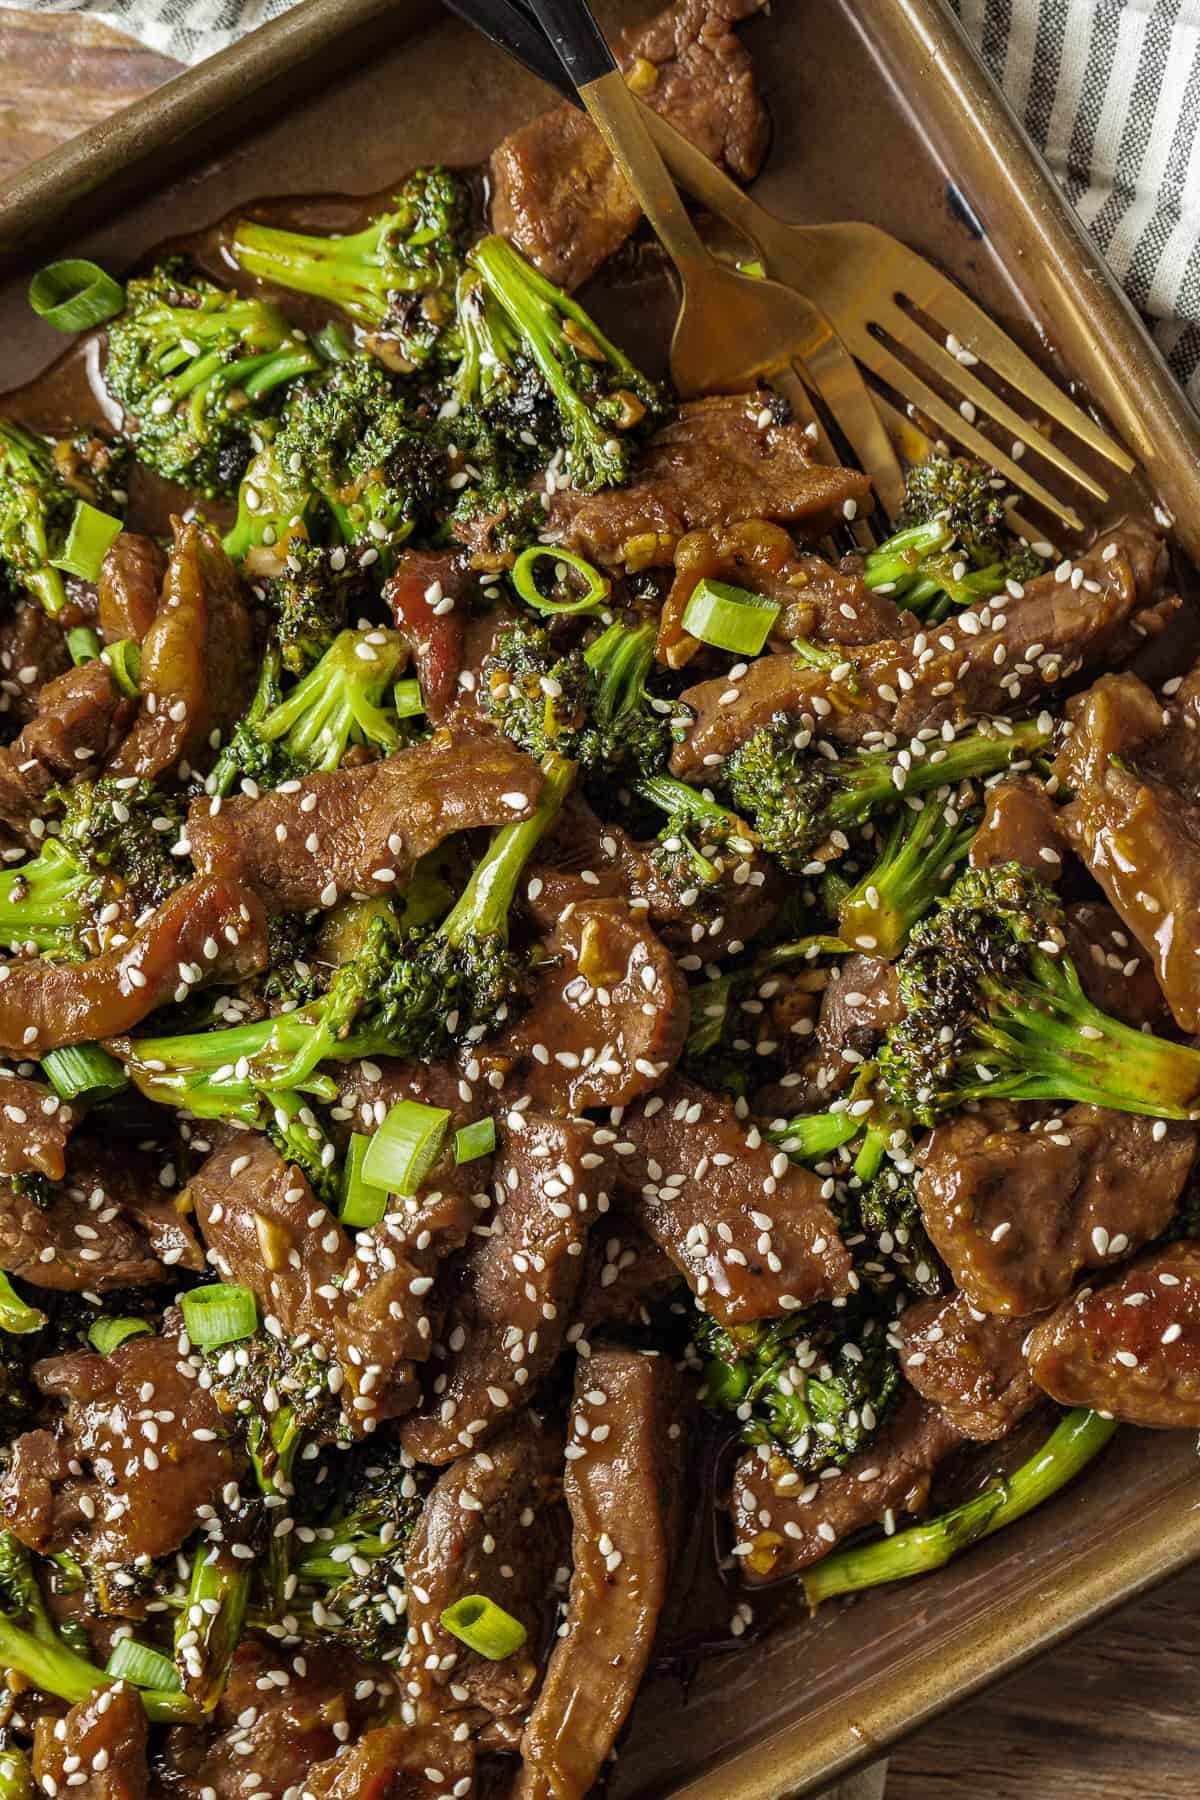 An overview shot of beef and broccoli topped with green onions and sesame seeds on a baking sheet.